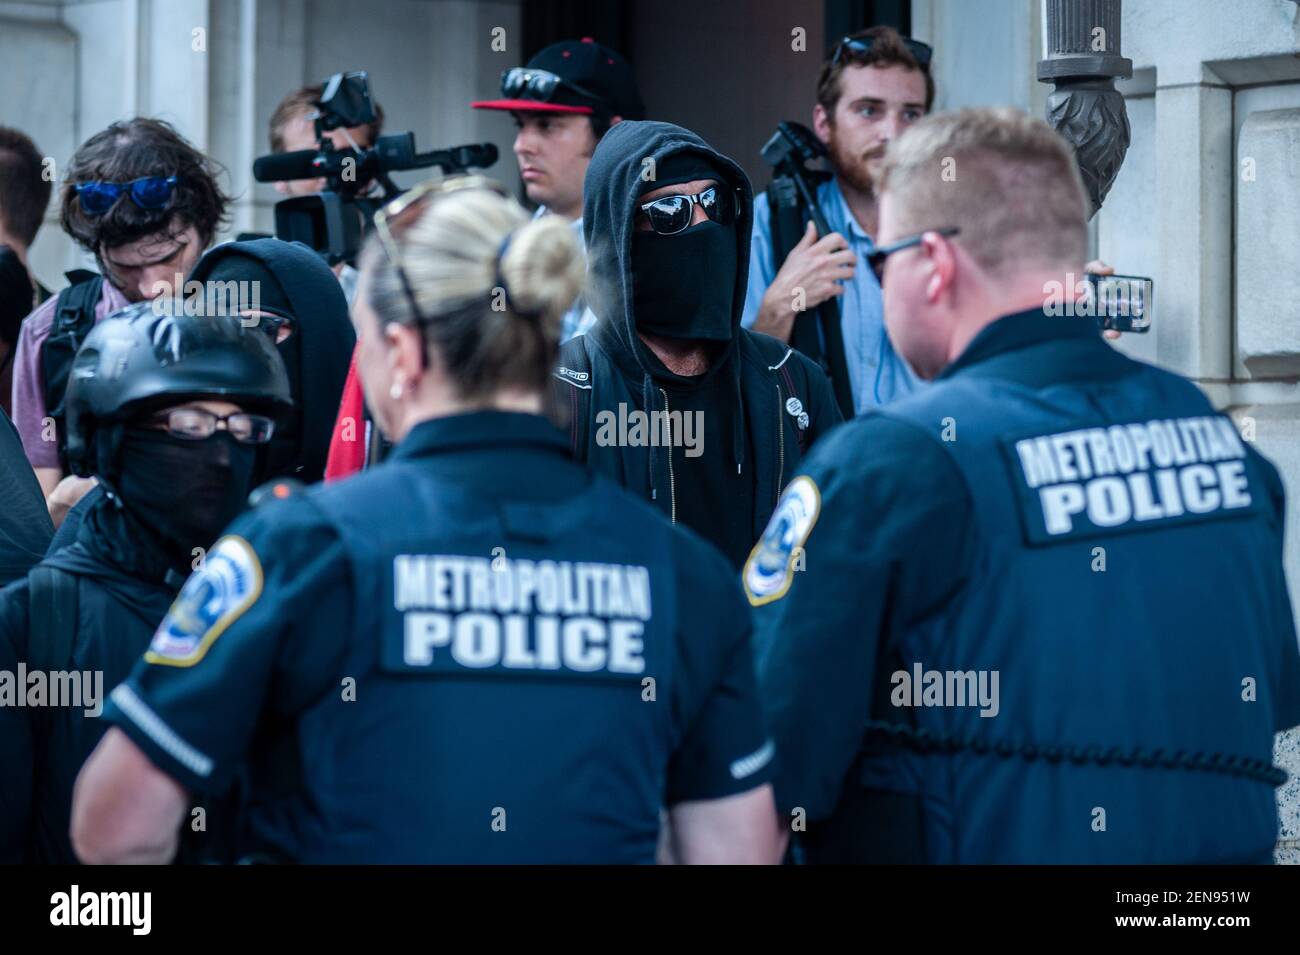 Metropolitian Police blocking Antifa members from the Trump Hotel in Washington D.C. on July 6, 2019. After the Demand Free Speech rally in Freedom plaza in the morning, the same organizers held a 'VIP Lounge Event' at the Trump Hotel in Washington D.C. on Saturday, July 6, 2019. Attendees entering the venue were greeted by Antifa members. Metropolitan police were quick to separate the opposing groups. One Antifa member was arrested in the process. Stock Photo